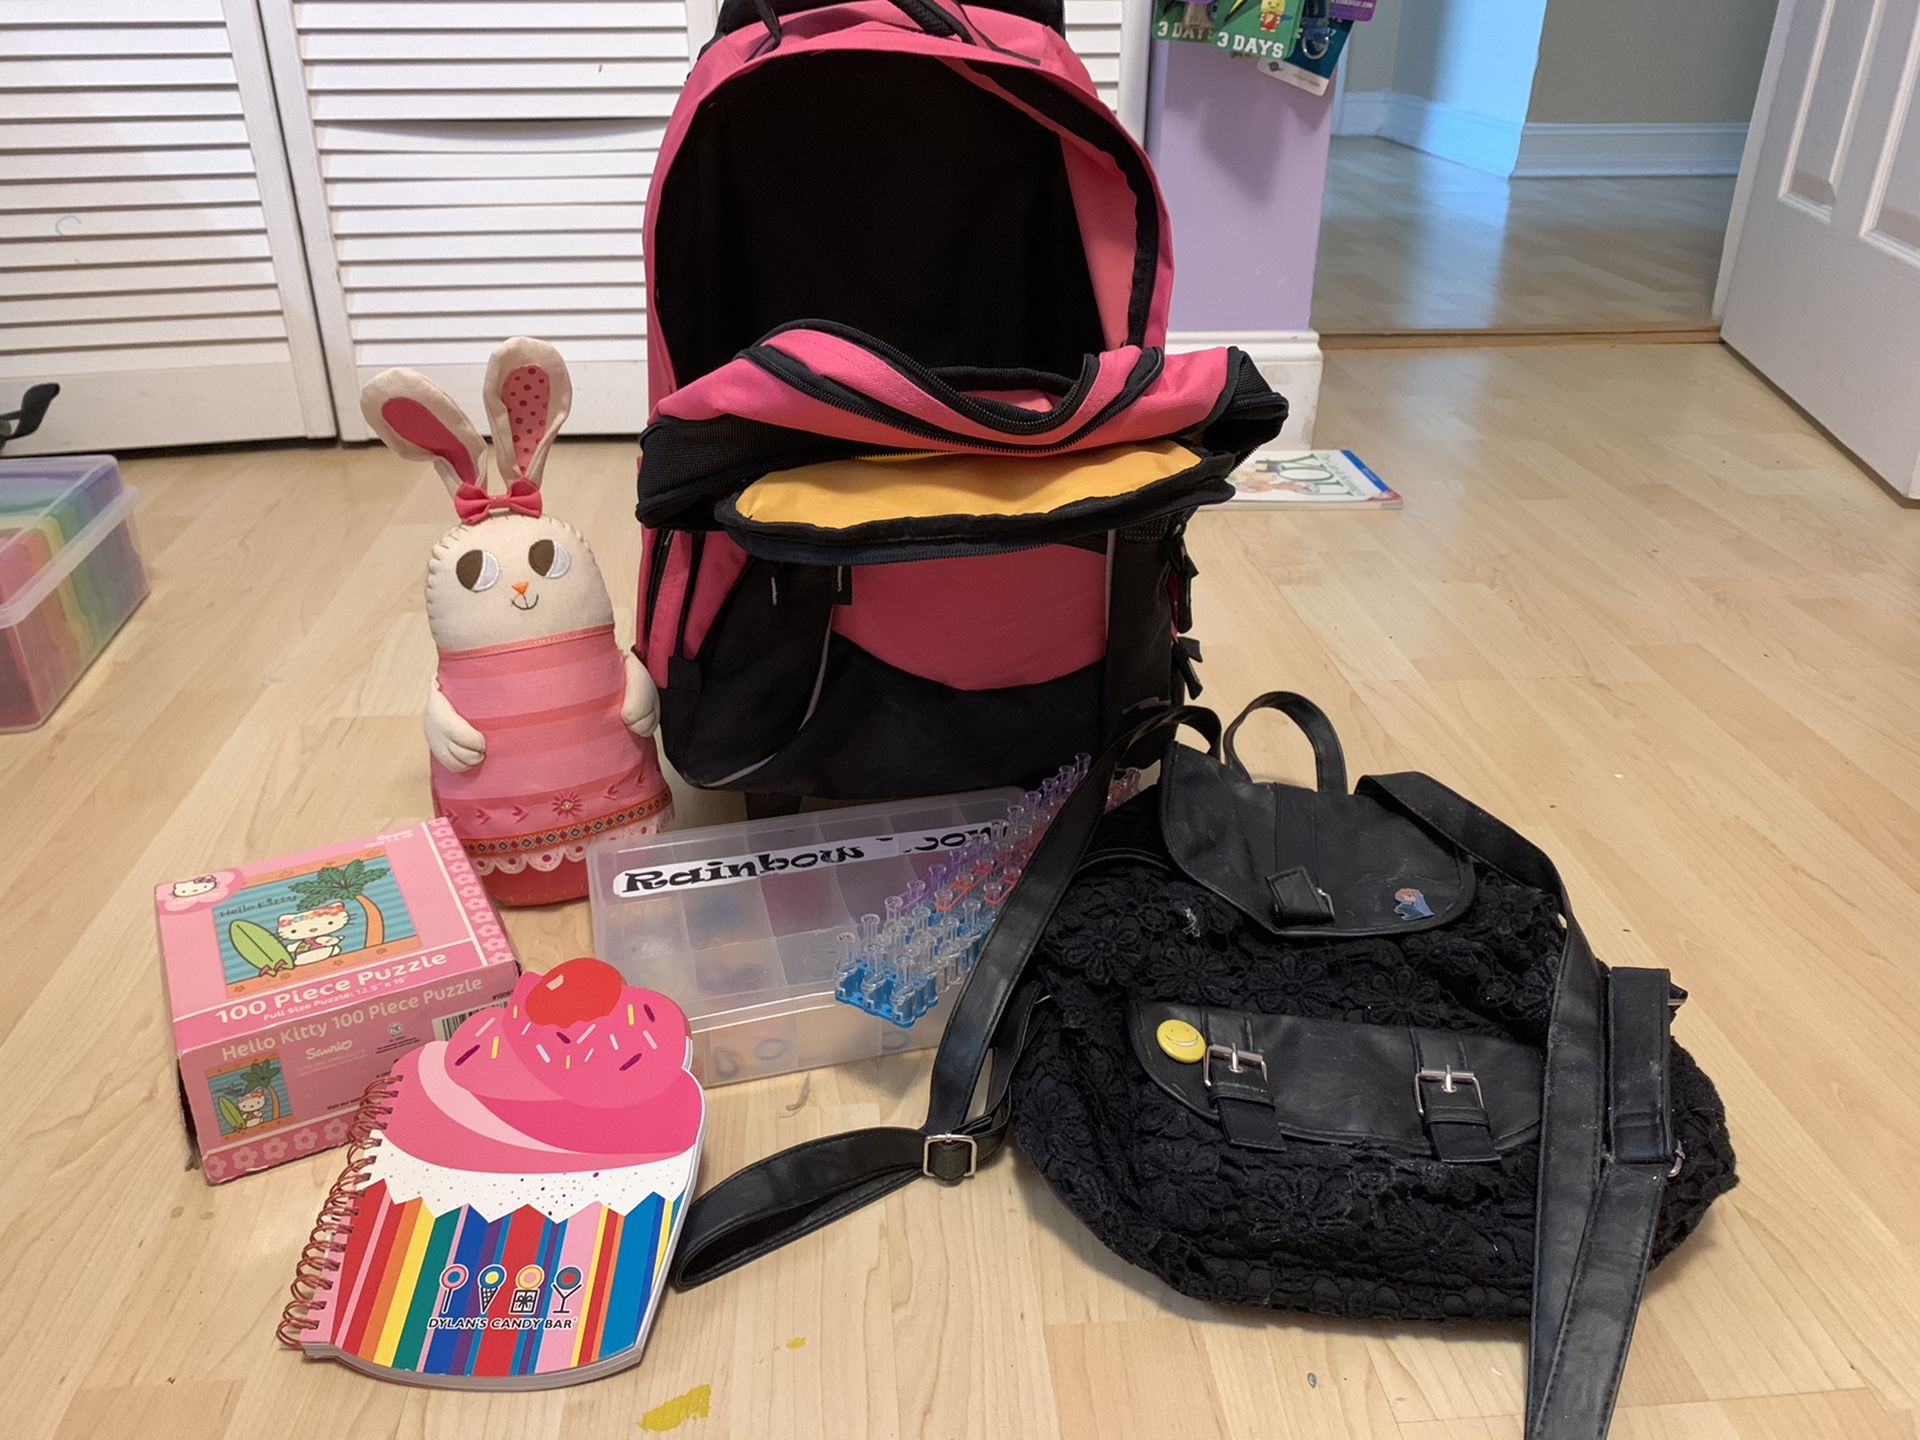 Miscellaneous Goodies, suitcase, backpack, children’s toys